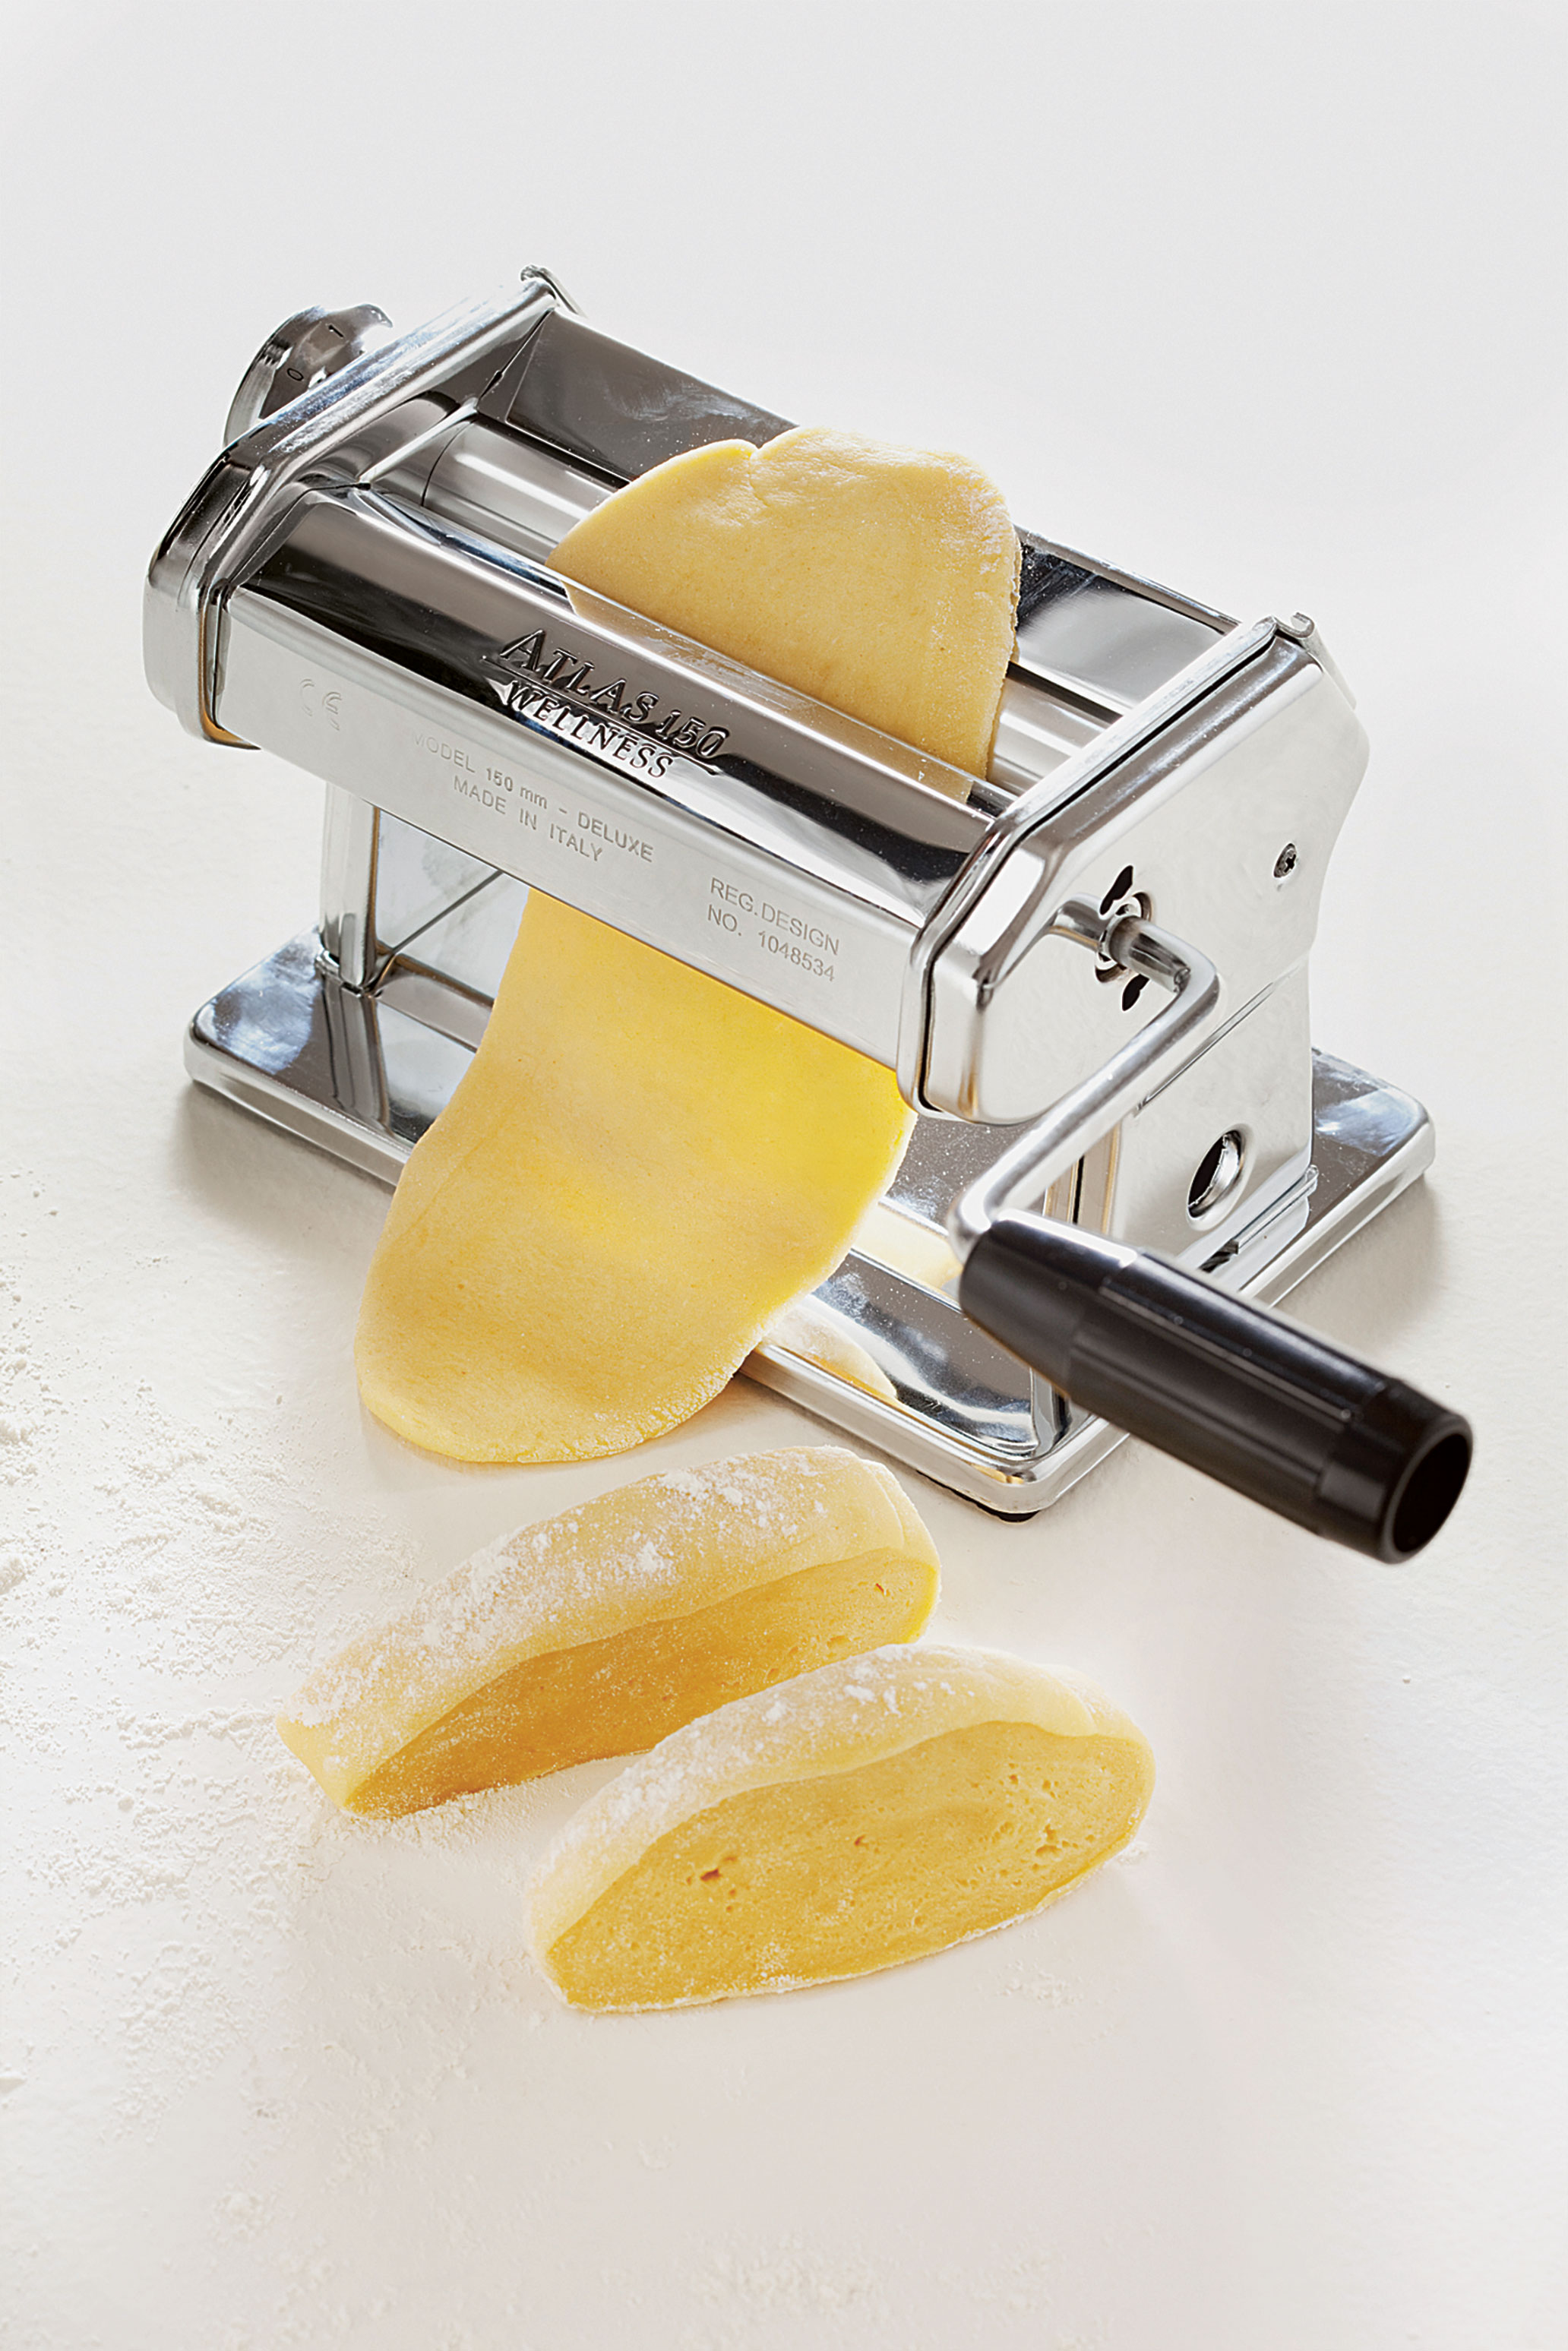 Fresh egg pasta being made in a pasta machine, as featured in The Silver Spoon Classic